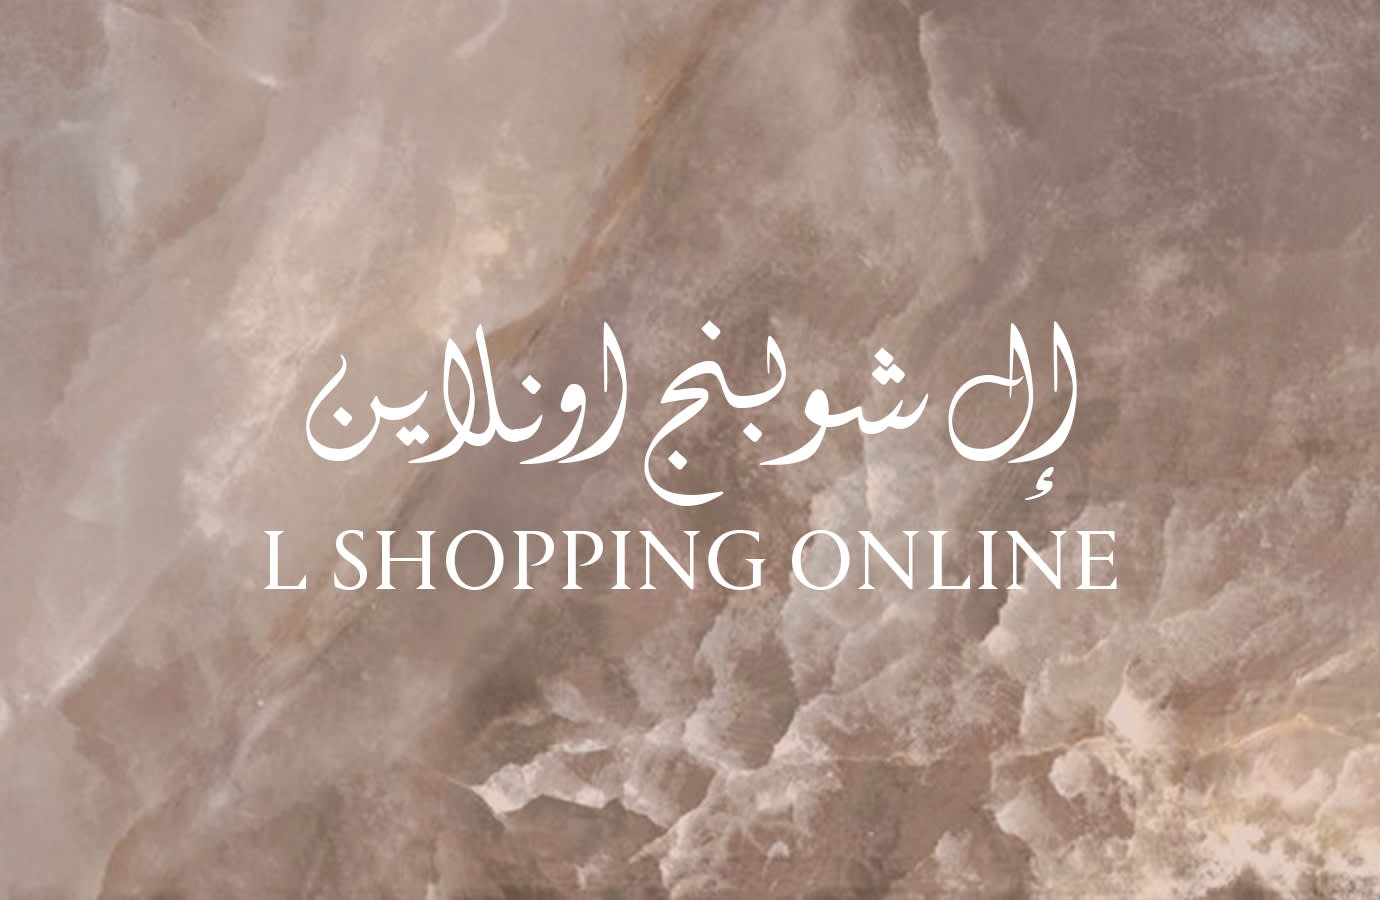 L Shopping Online TEXT ONLY LP